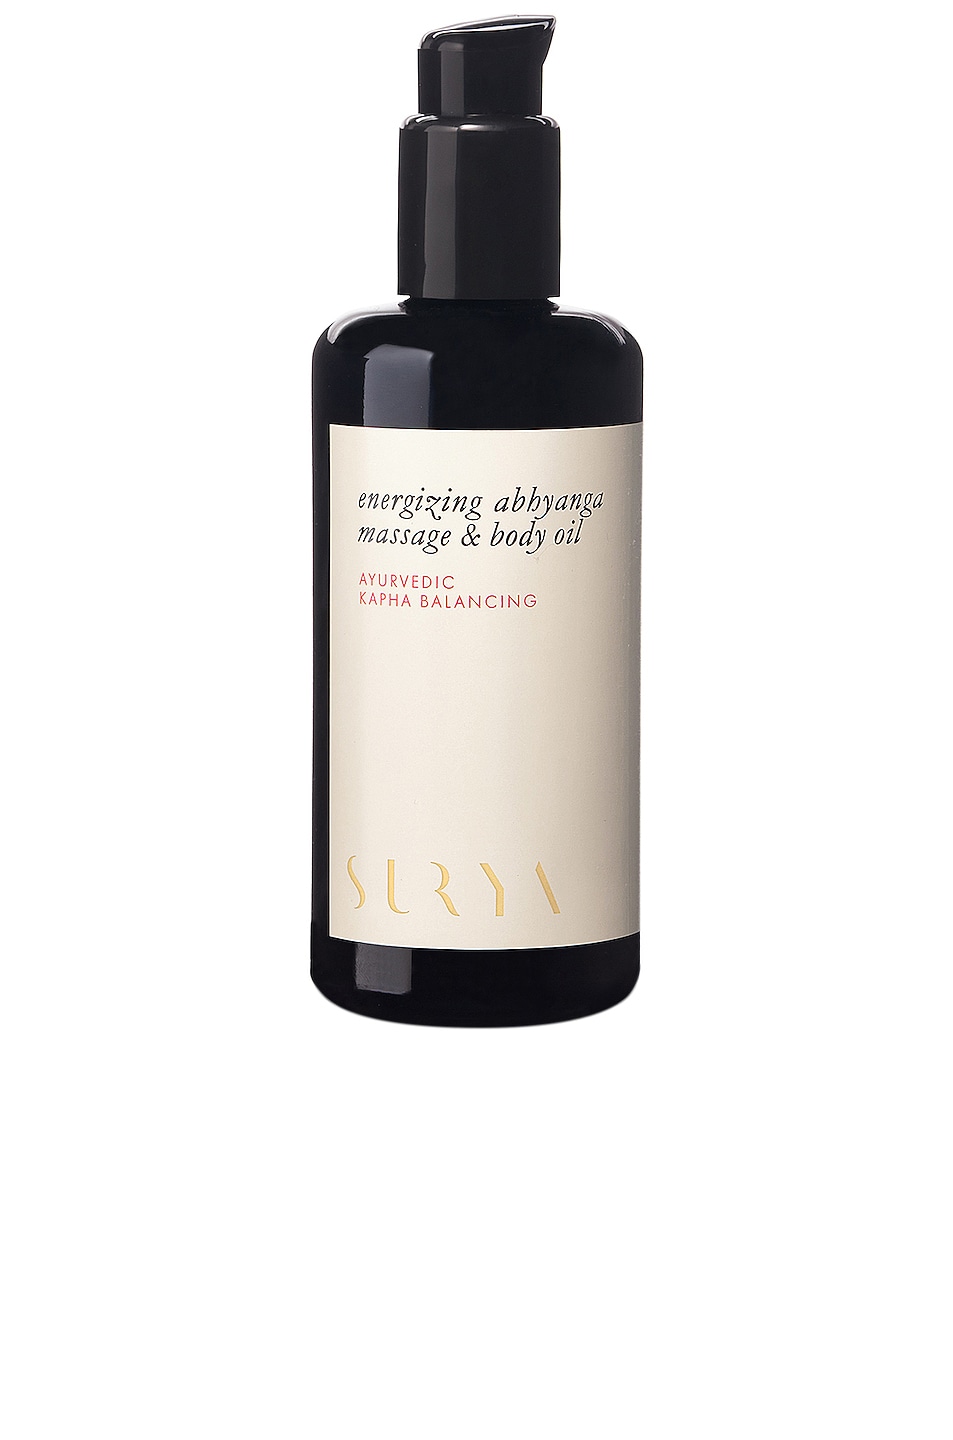 Energizing Body & Massage Oil in Beauty: NA